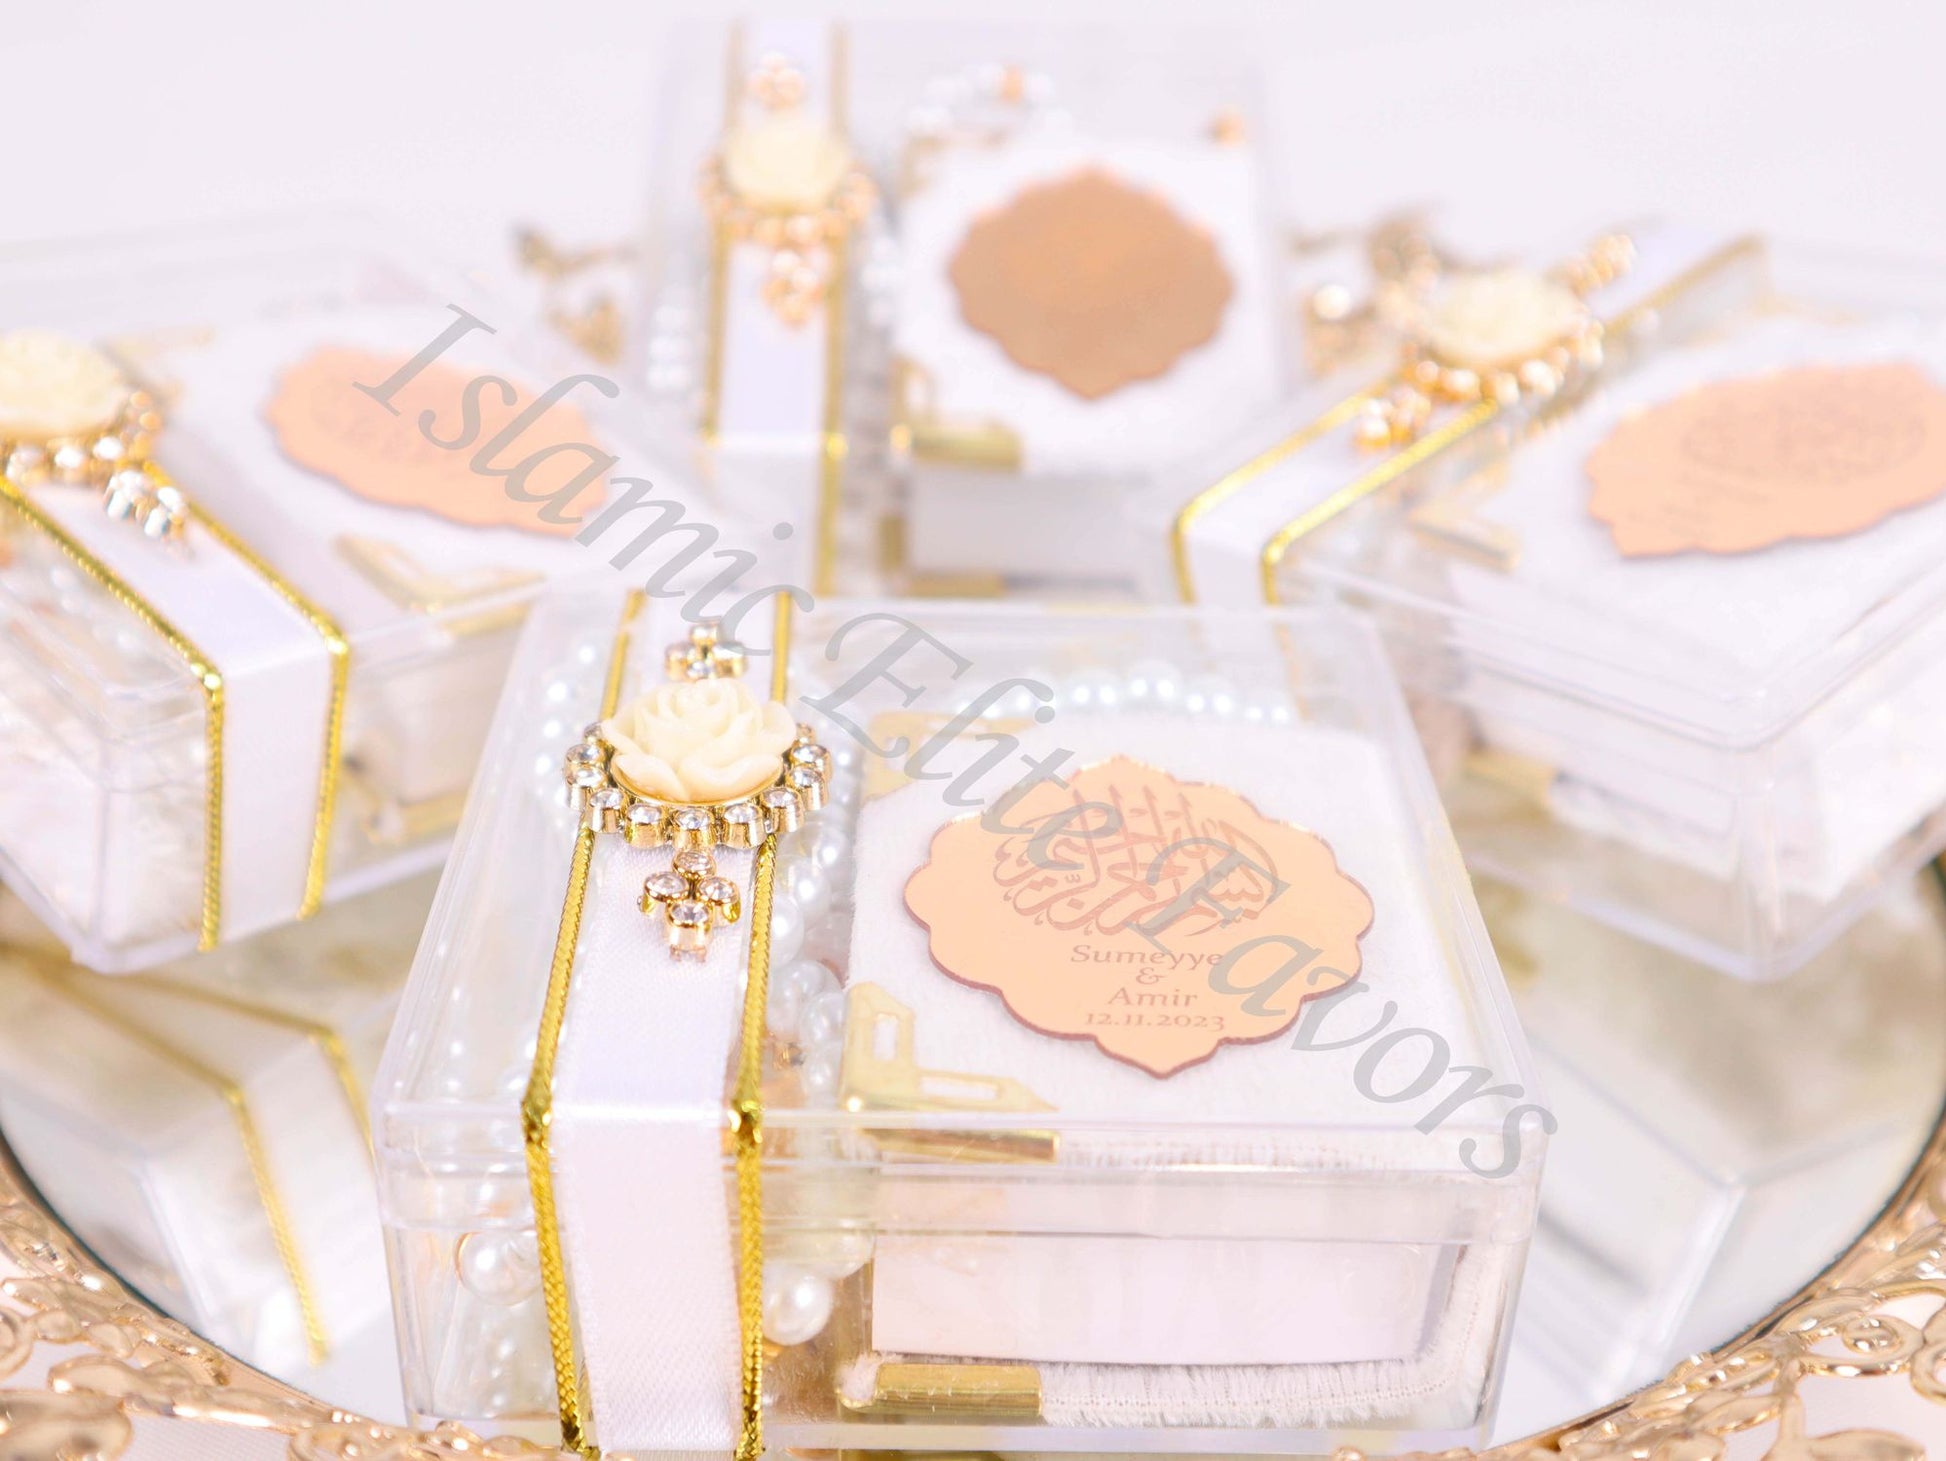 Personalized Mini Quran Tasbeeh Flower with Rhinestones Wedding Favor - Islamic Elite Favors is a handmade gift shop offering a wide variety of unique and personalized gifts for all occasions. Whether you're looking for the perfect Ramadan, Eid, Hajj, wedding gift or something special for a birthday, baby shower or anniversary, we have something for everyone. High quality, made with love.